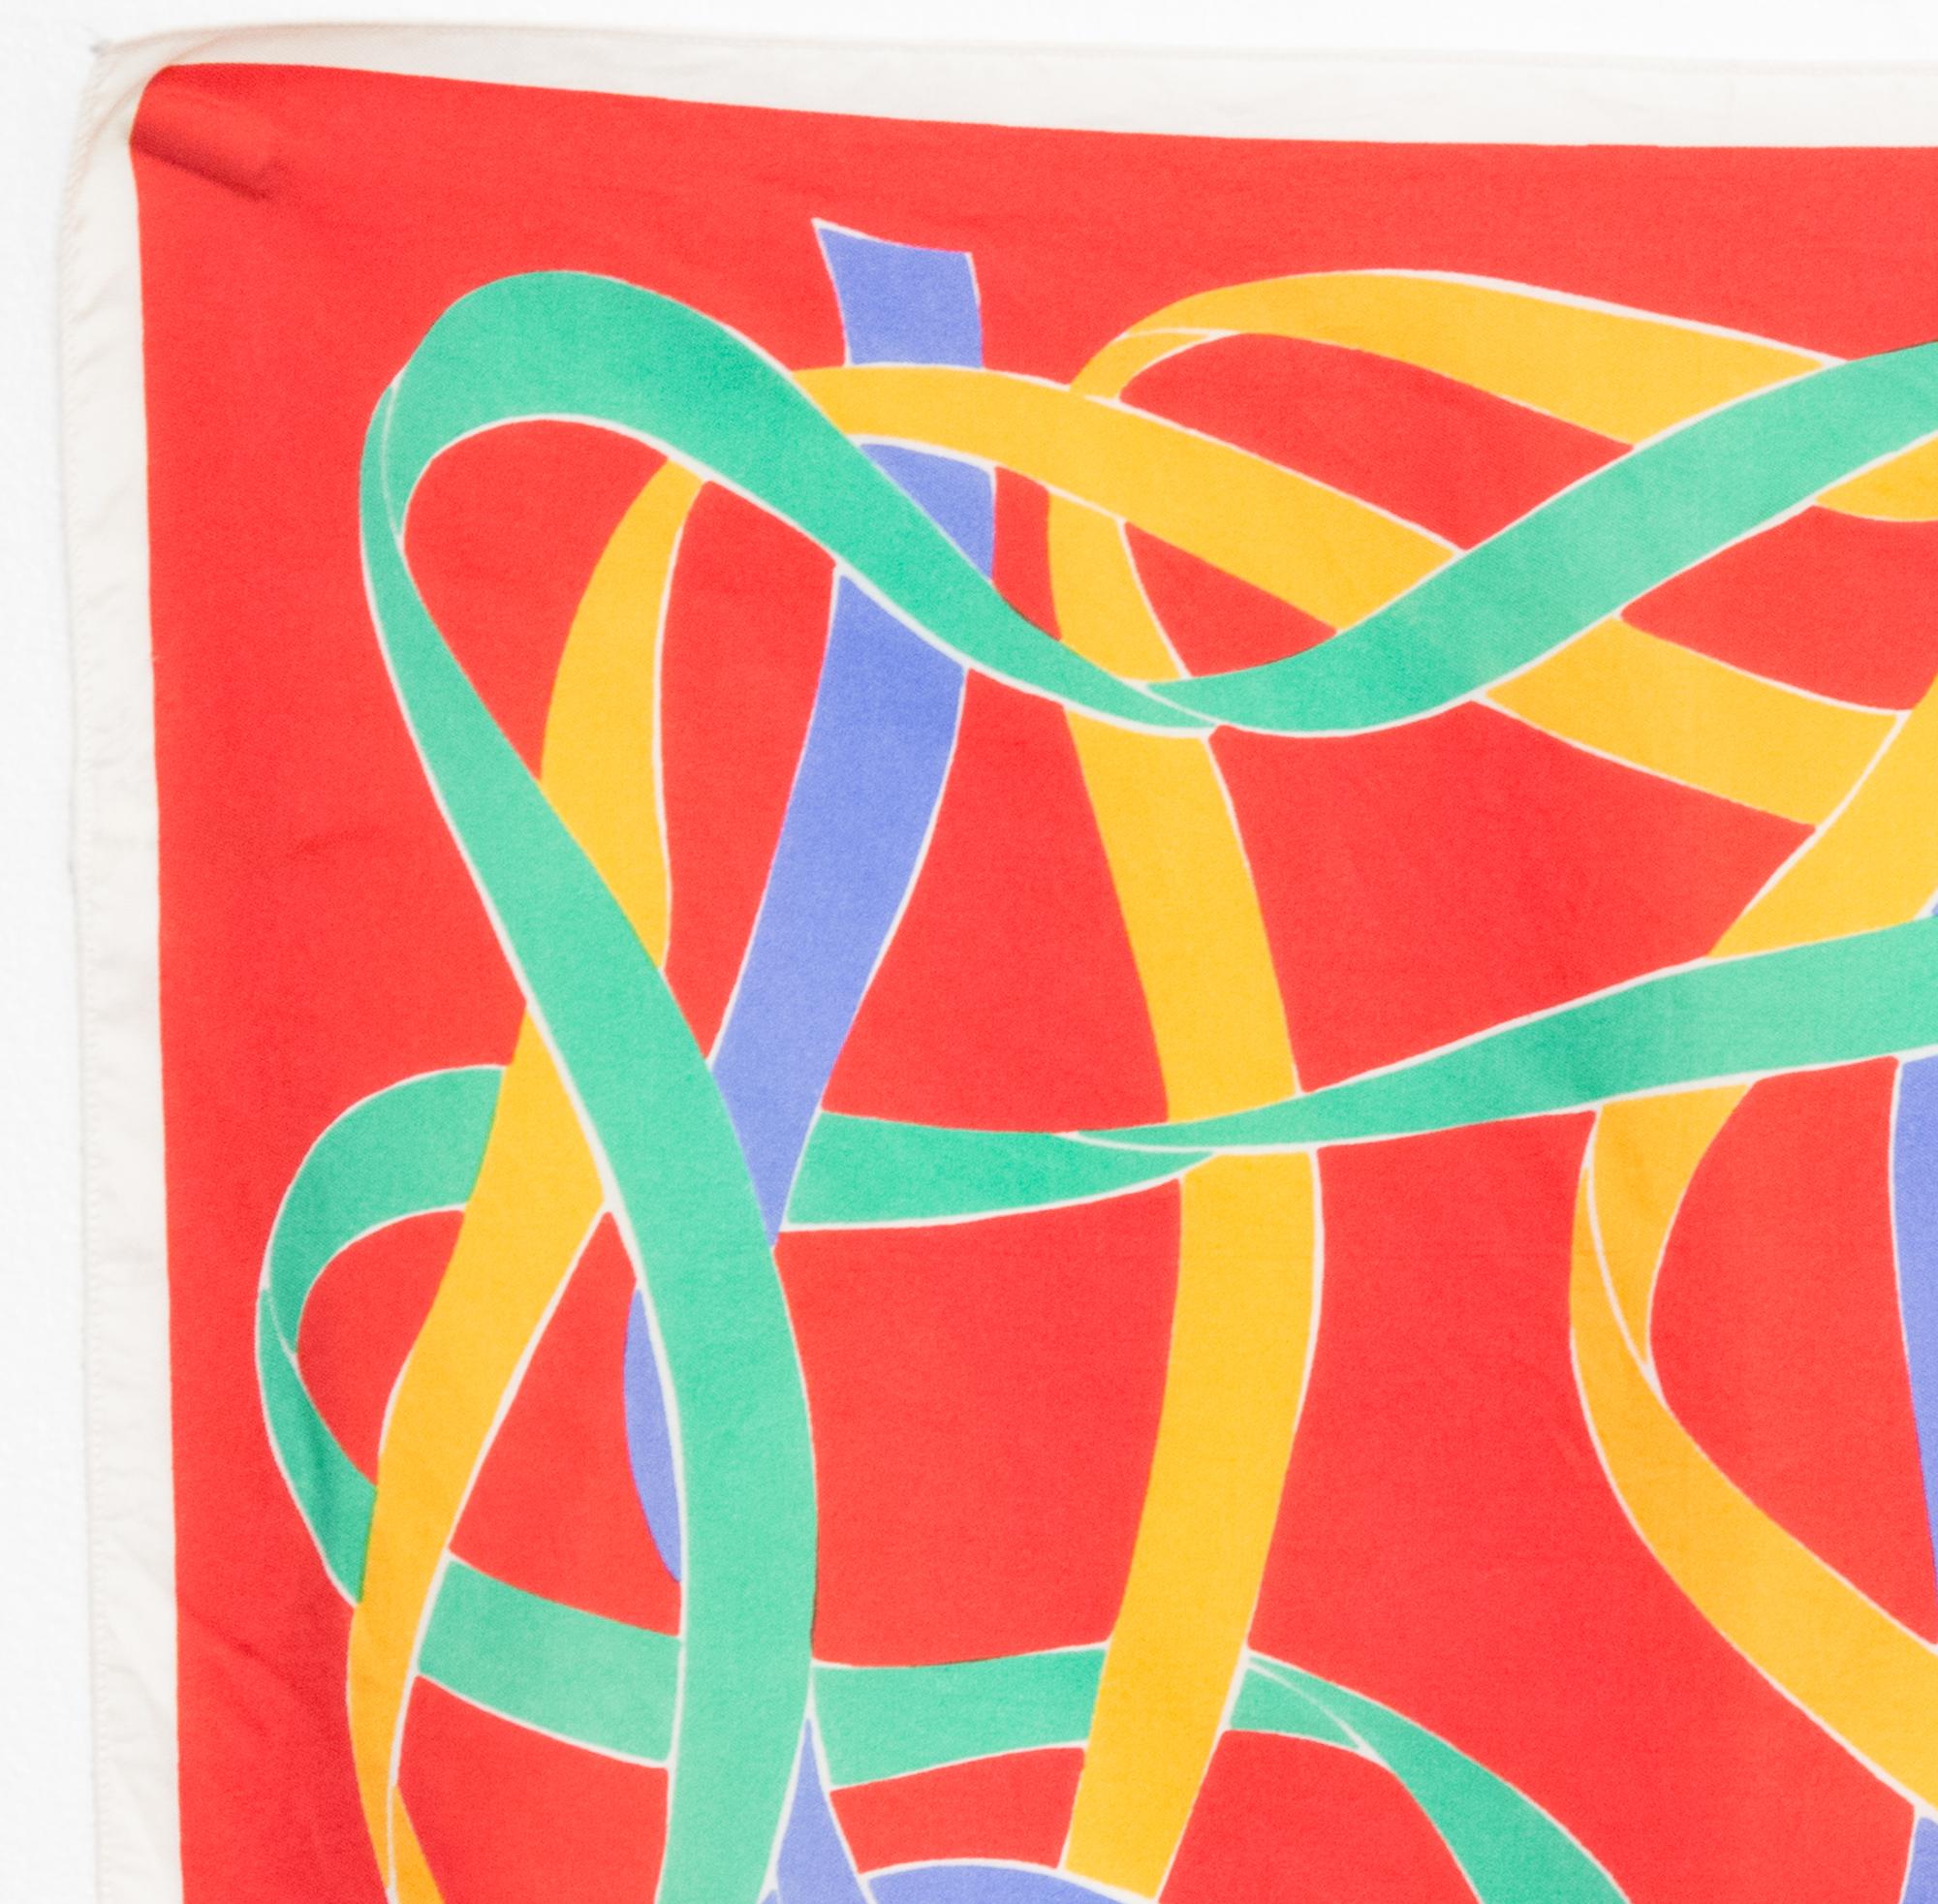 1990 Tokyo Yves Saint Laurent YSL small silk scarf featuring a multicolour ribbons scene, signature marked on.
In good vintage condition. Made in France.
14.9in. (38cm) X 14.9in. (38cm)
We guarantee you will receive this  iconic item as described